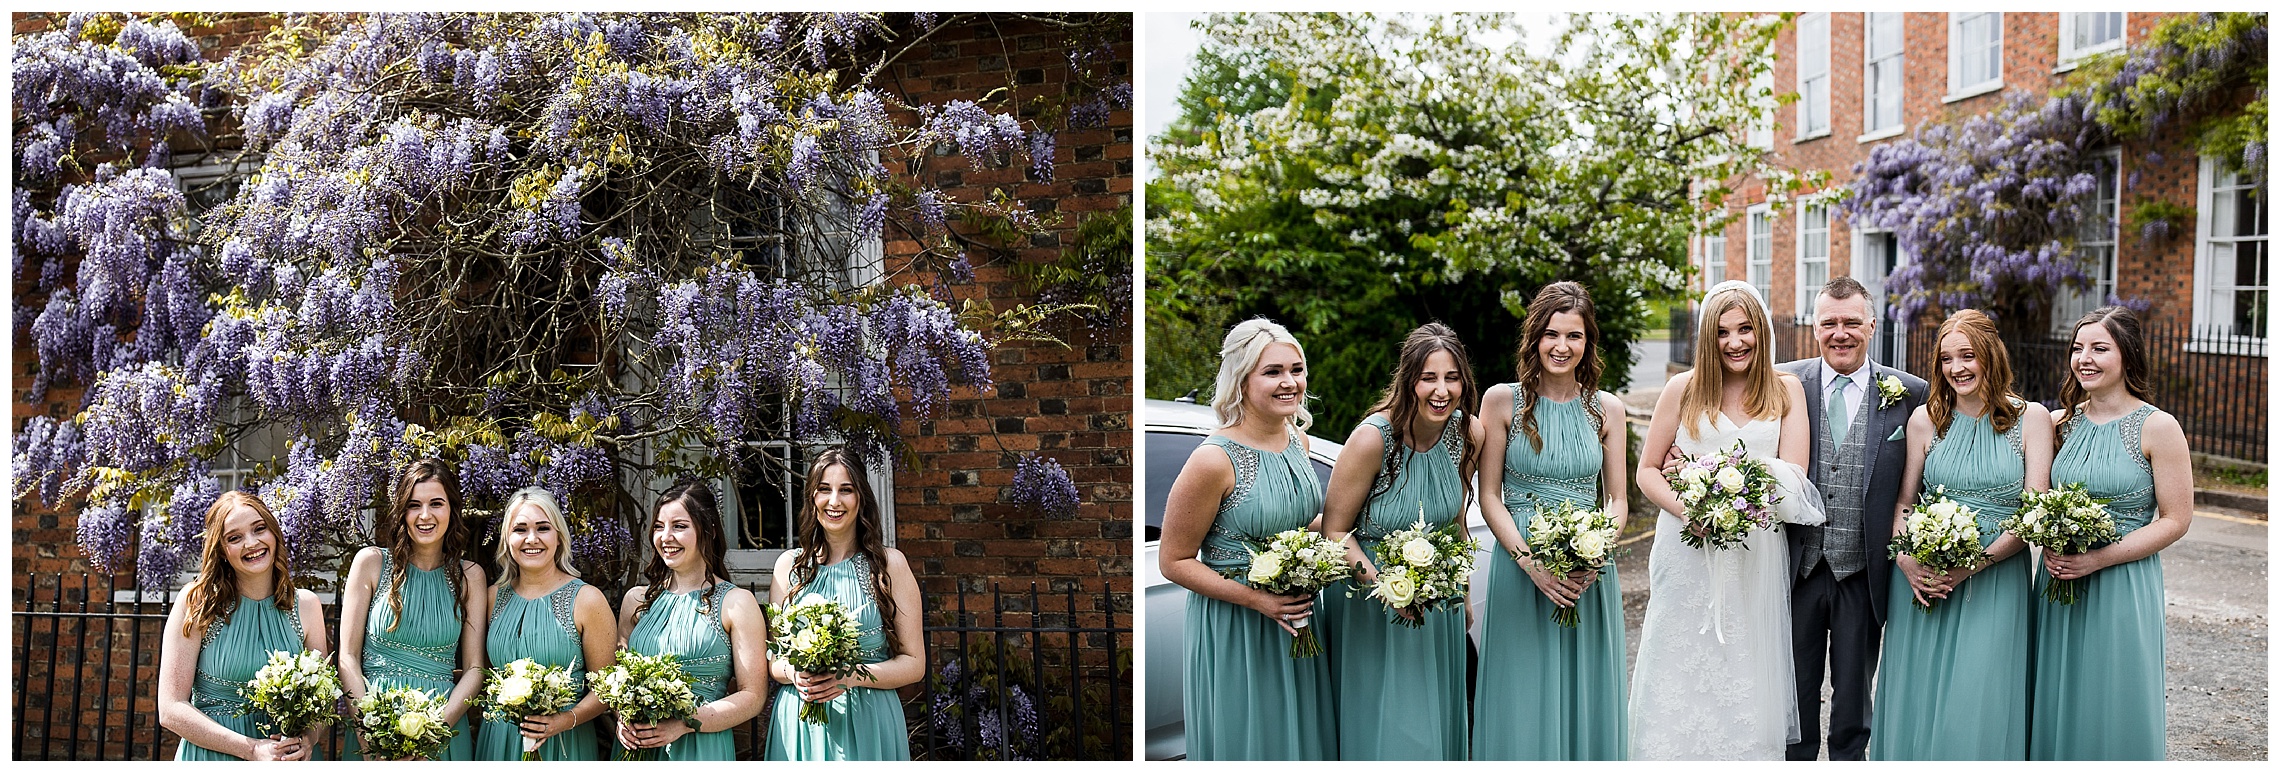 Brides in mint dresses surround bride in front of brick wall with wisteria